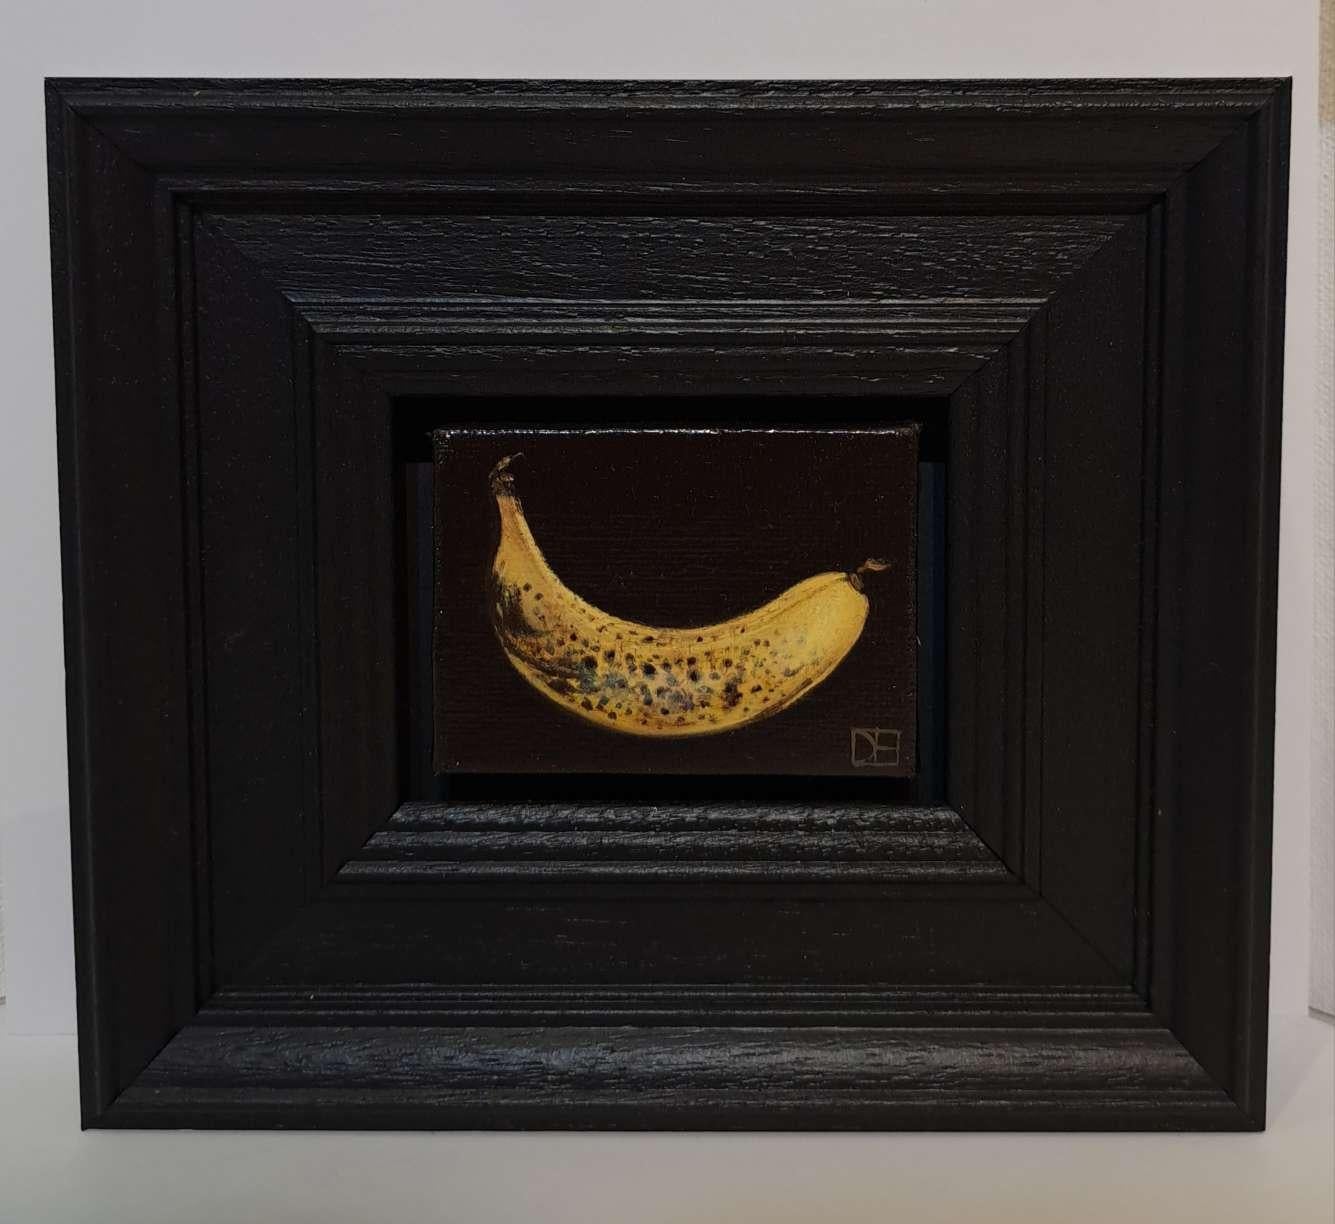 Pocket Speckled Greeen Pear is an original oil painting by Dani Humberstone as part of her Pocket Painting series featuring small scale oil realistic oil paintings with a nod to baroque still life. The paintings are set in a black wood layered